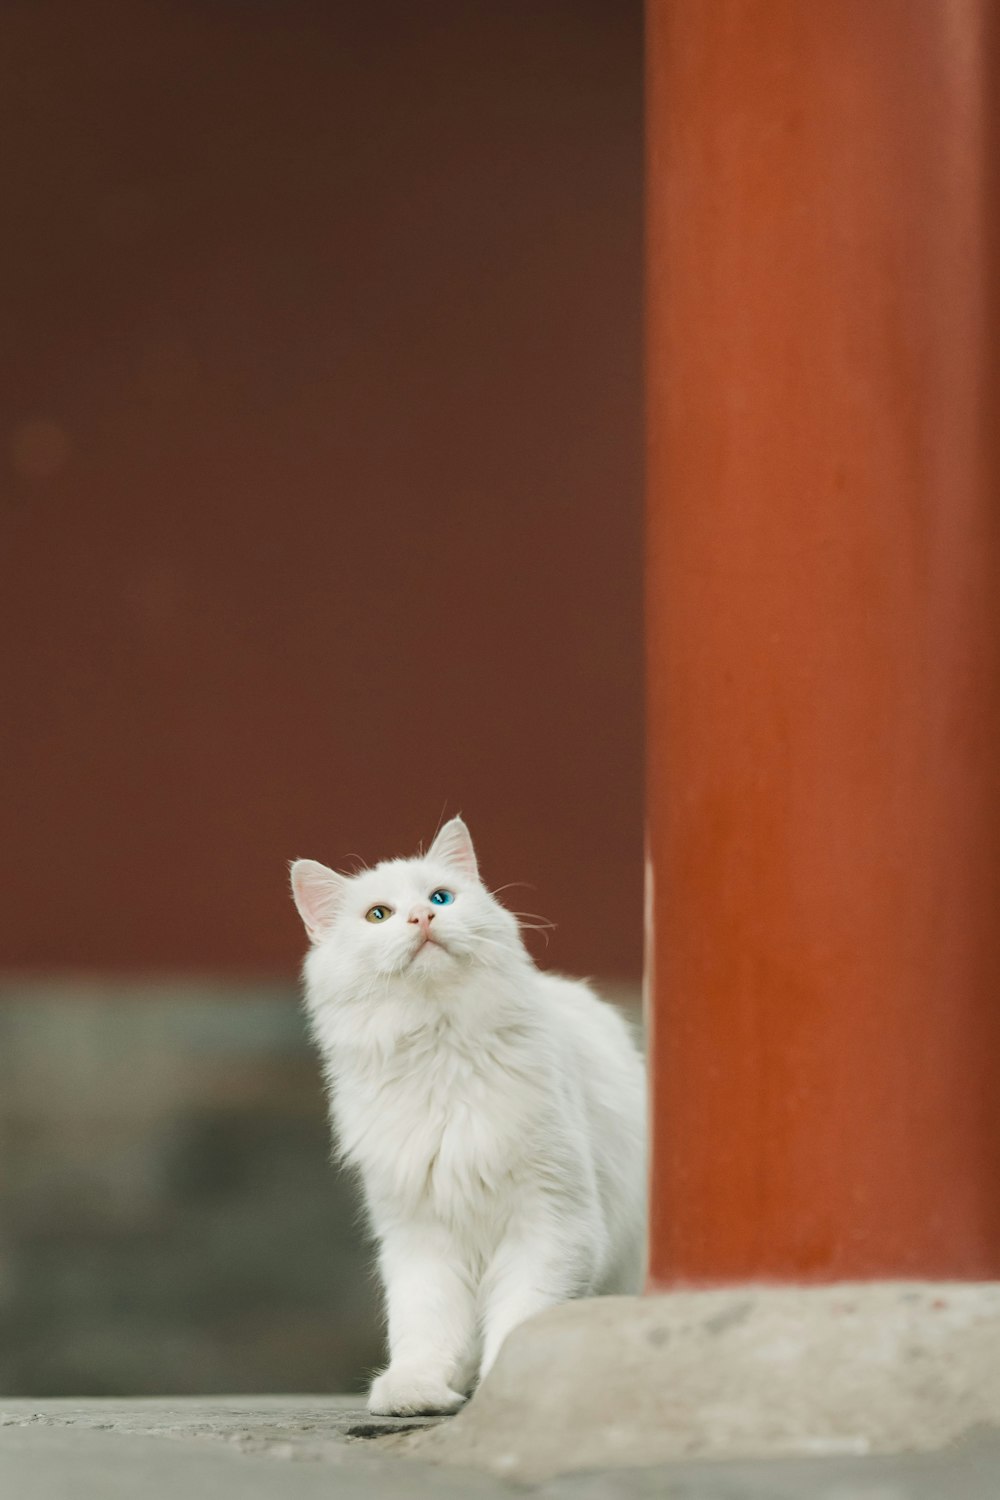 a white cat sitting on the ground next to a pillar